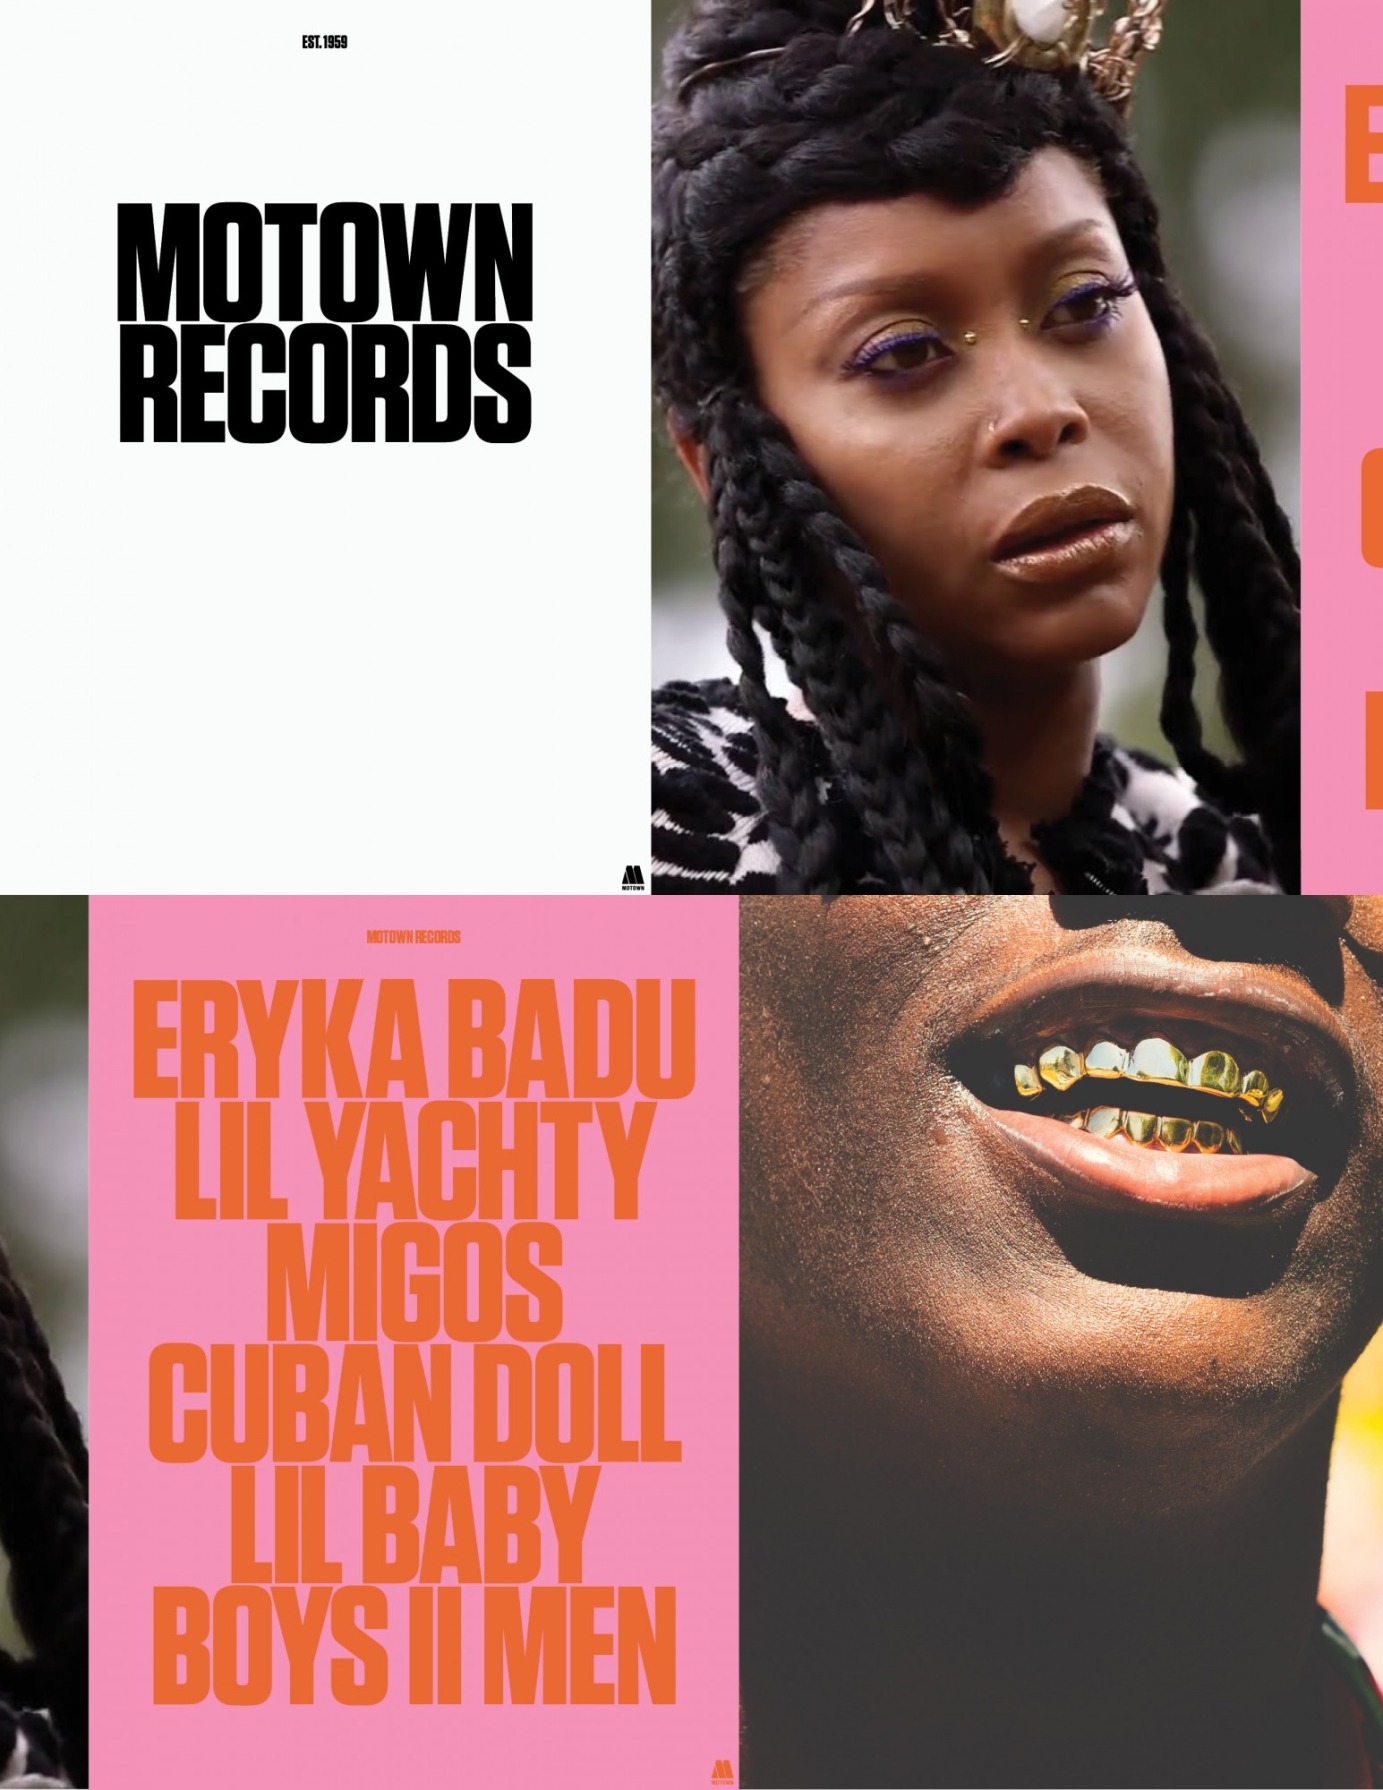 60 YEARS OF MOTOWN RECORDS — 002